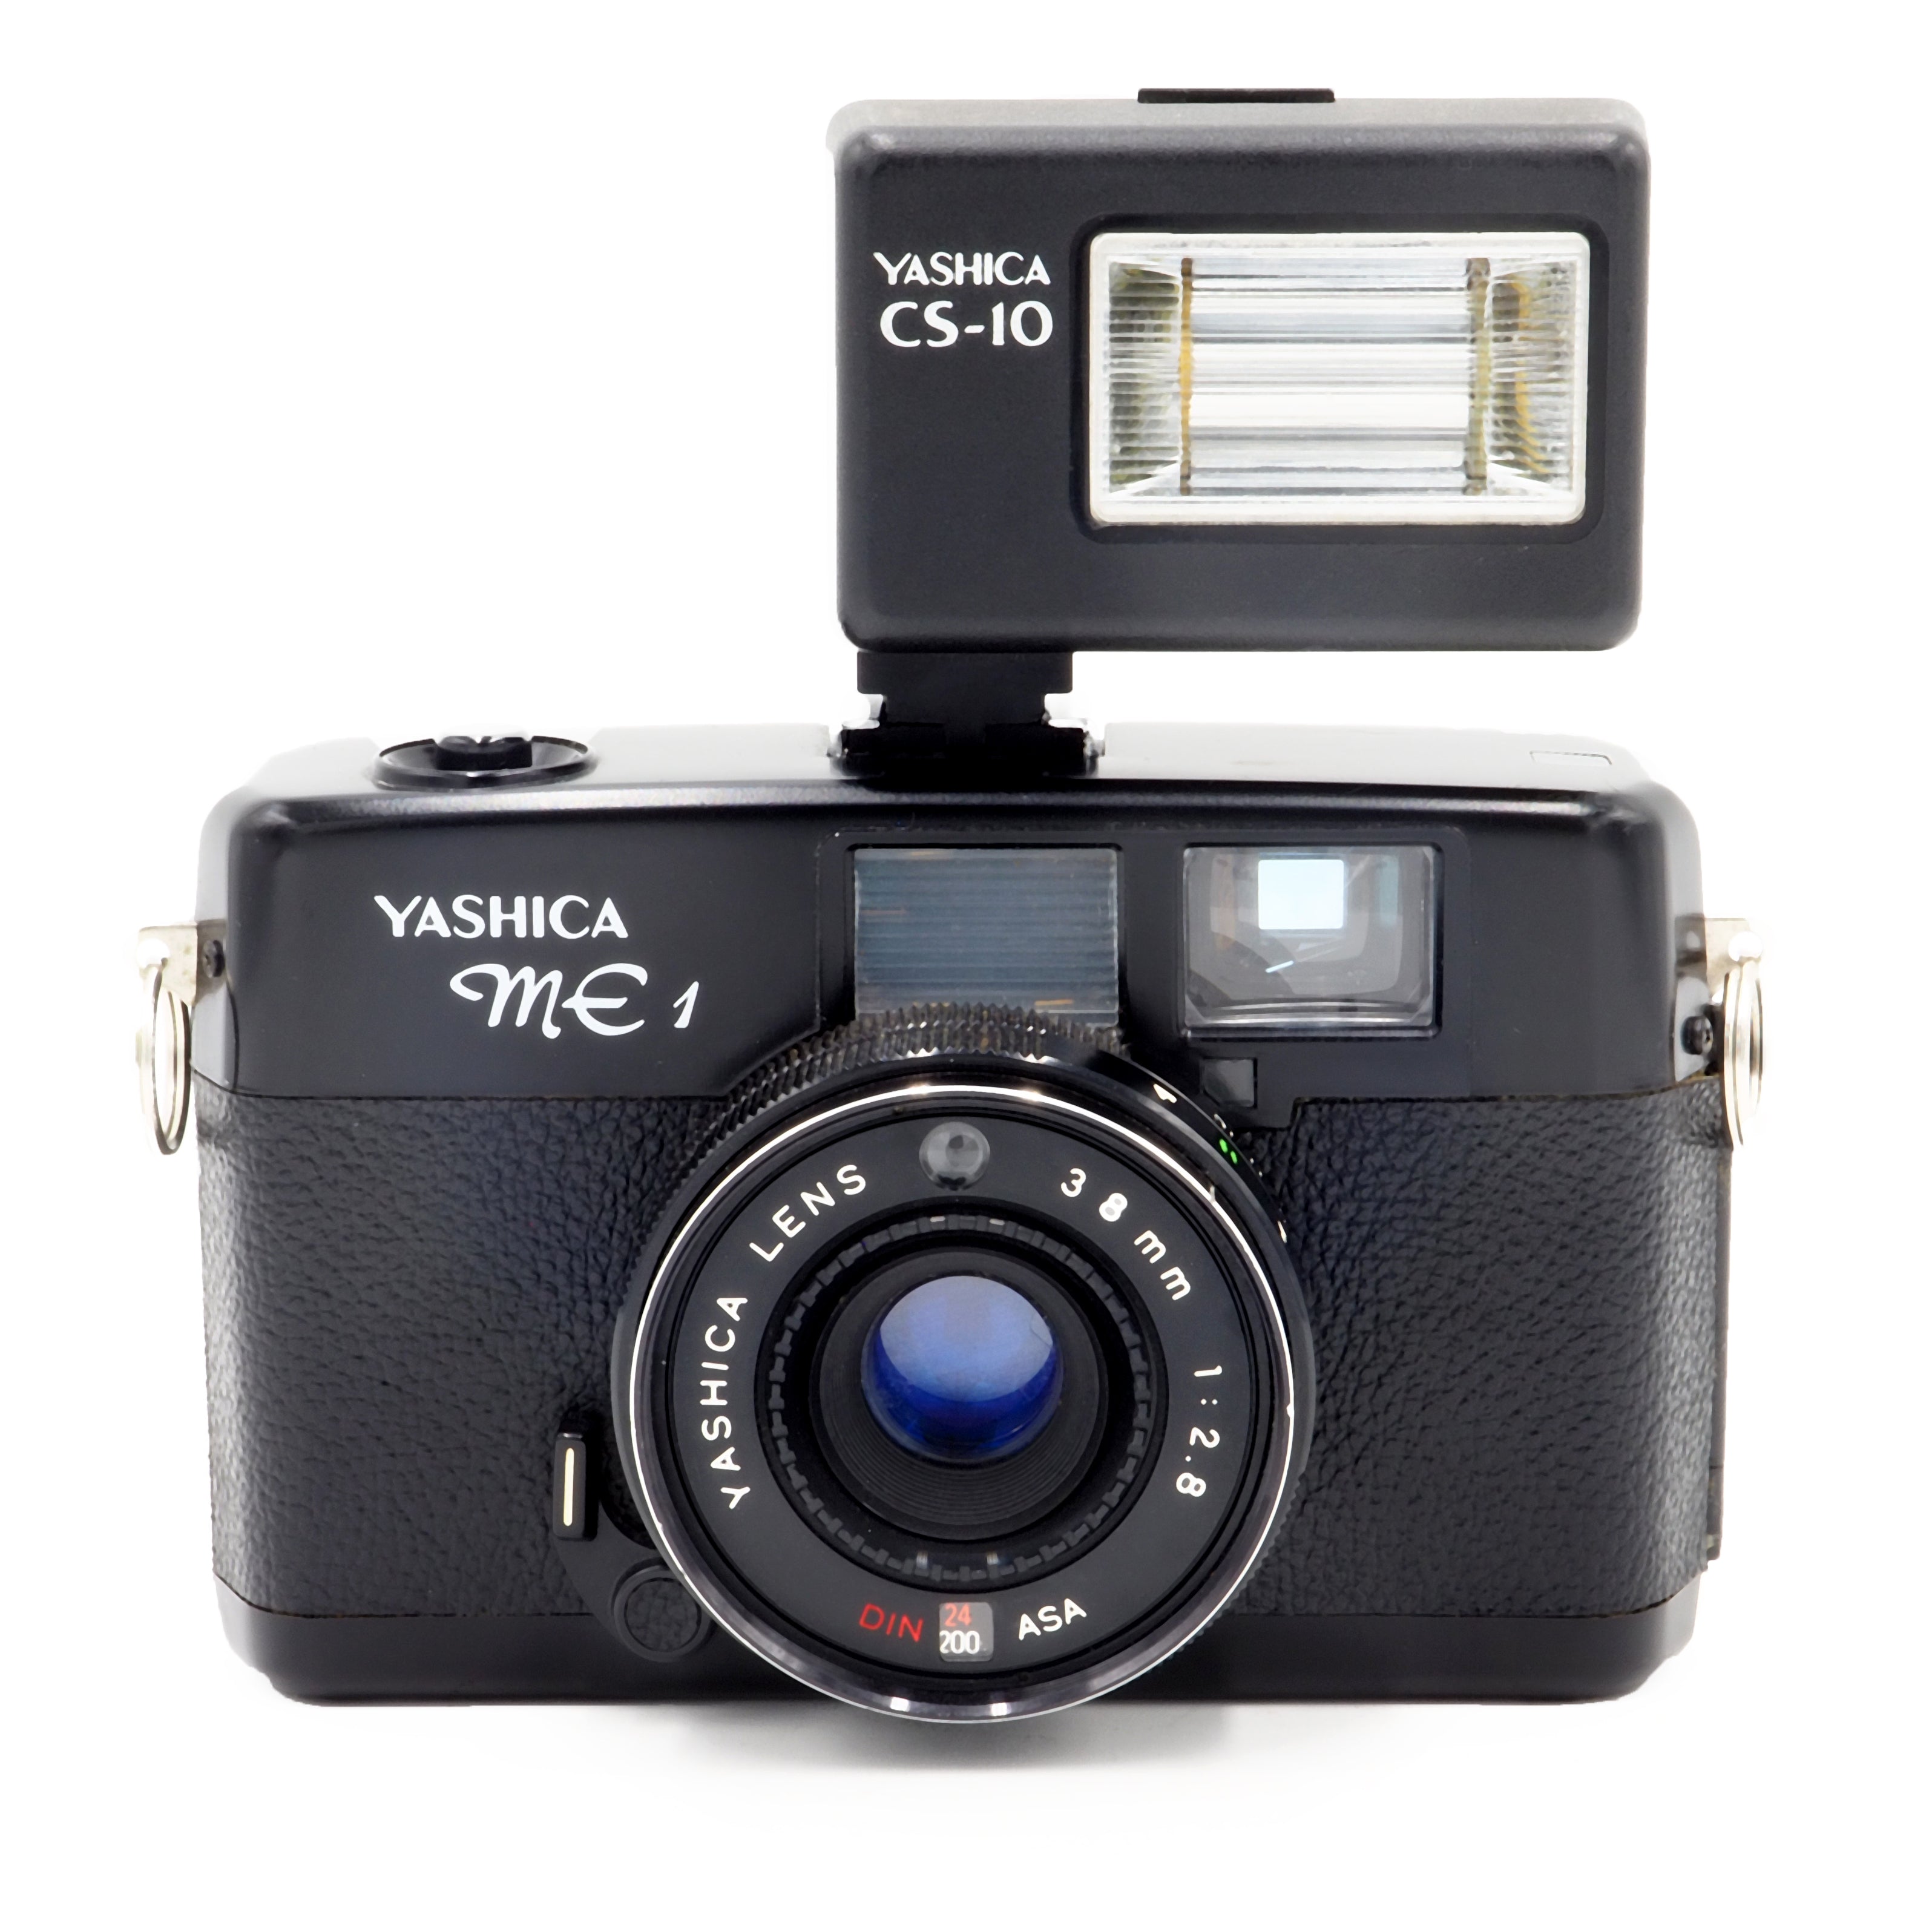 Yashica CS-201 Auto SLR 35mm camera flash perfect working order complete in  box with manual